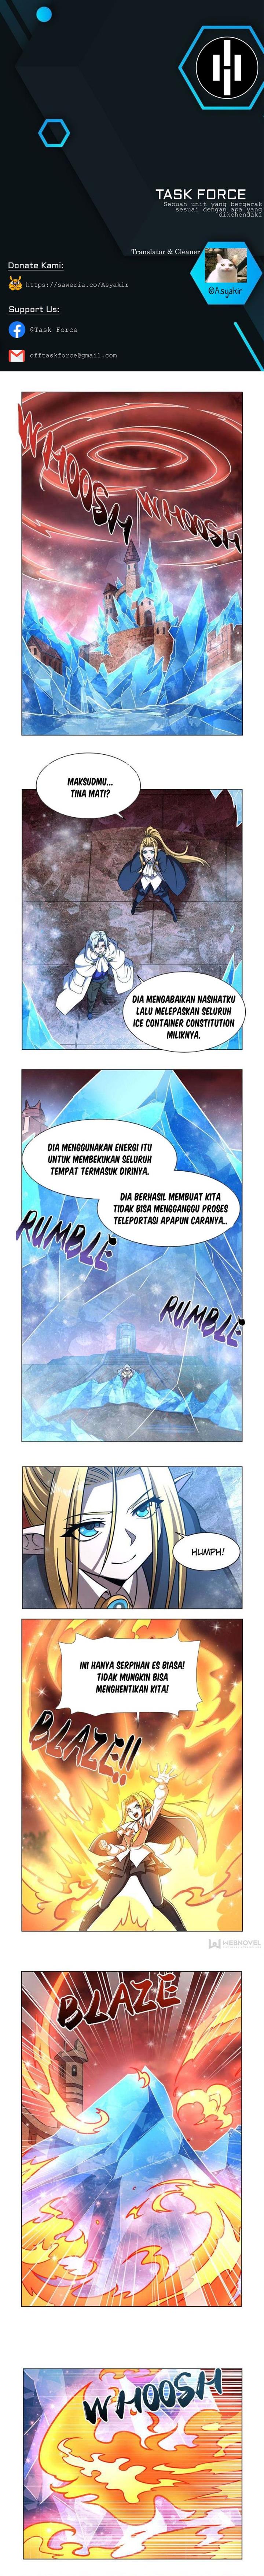 The Blood Princess and the Knight Chapter 277